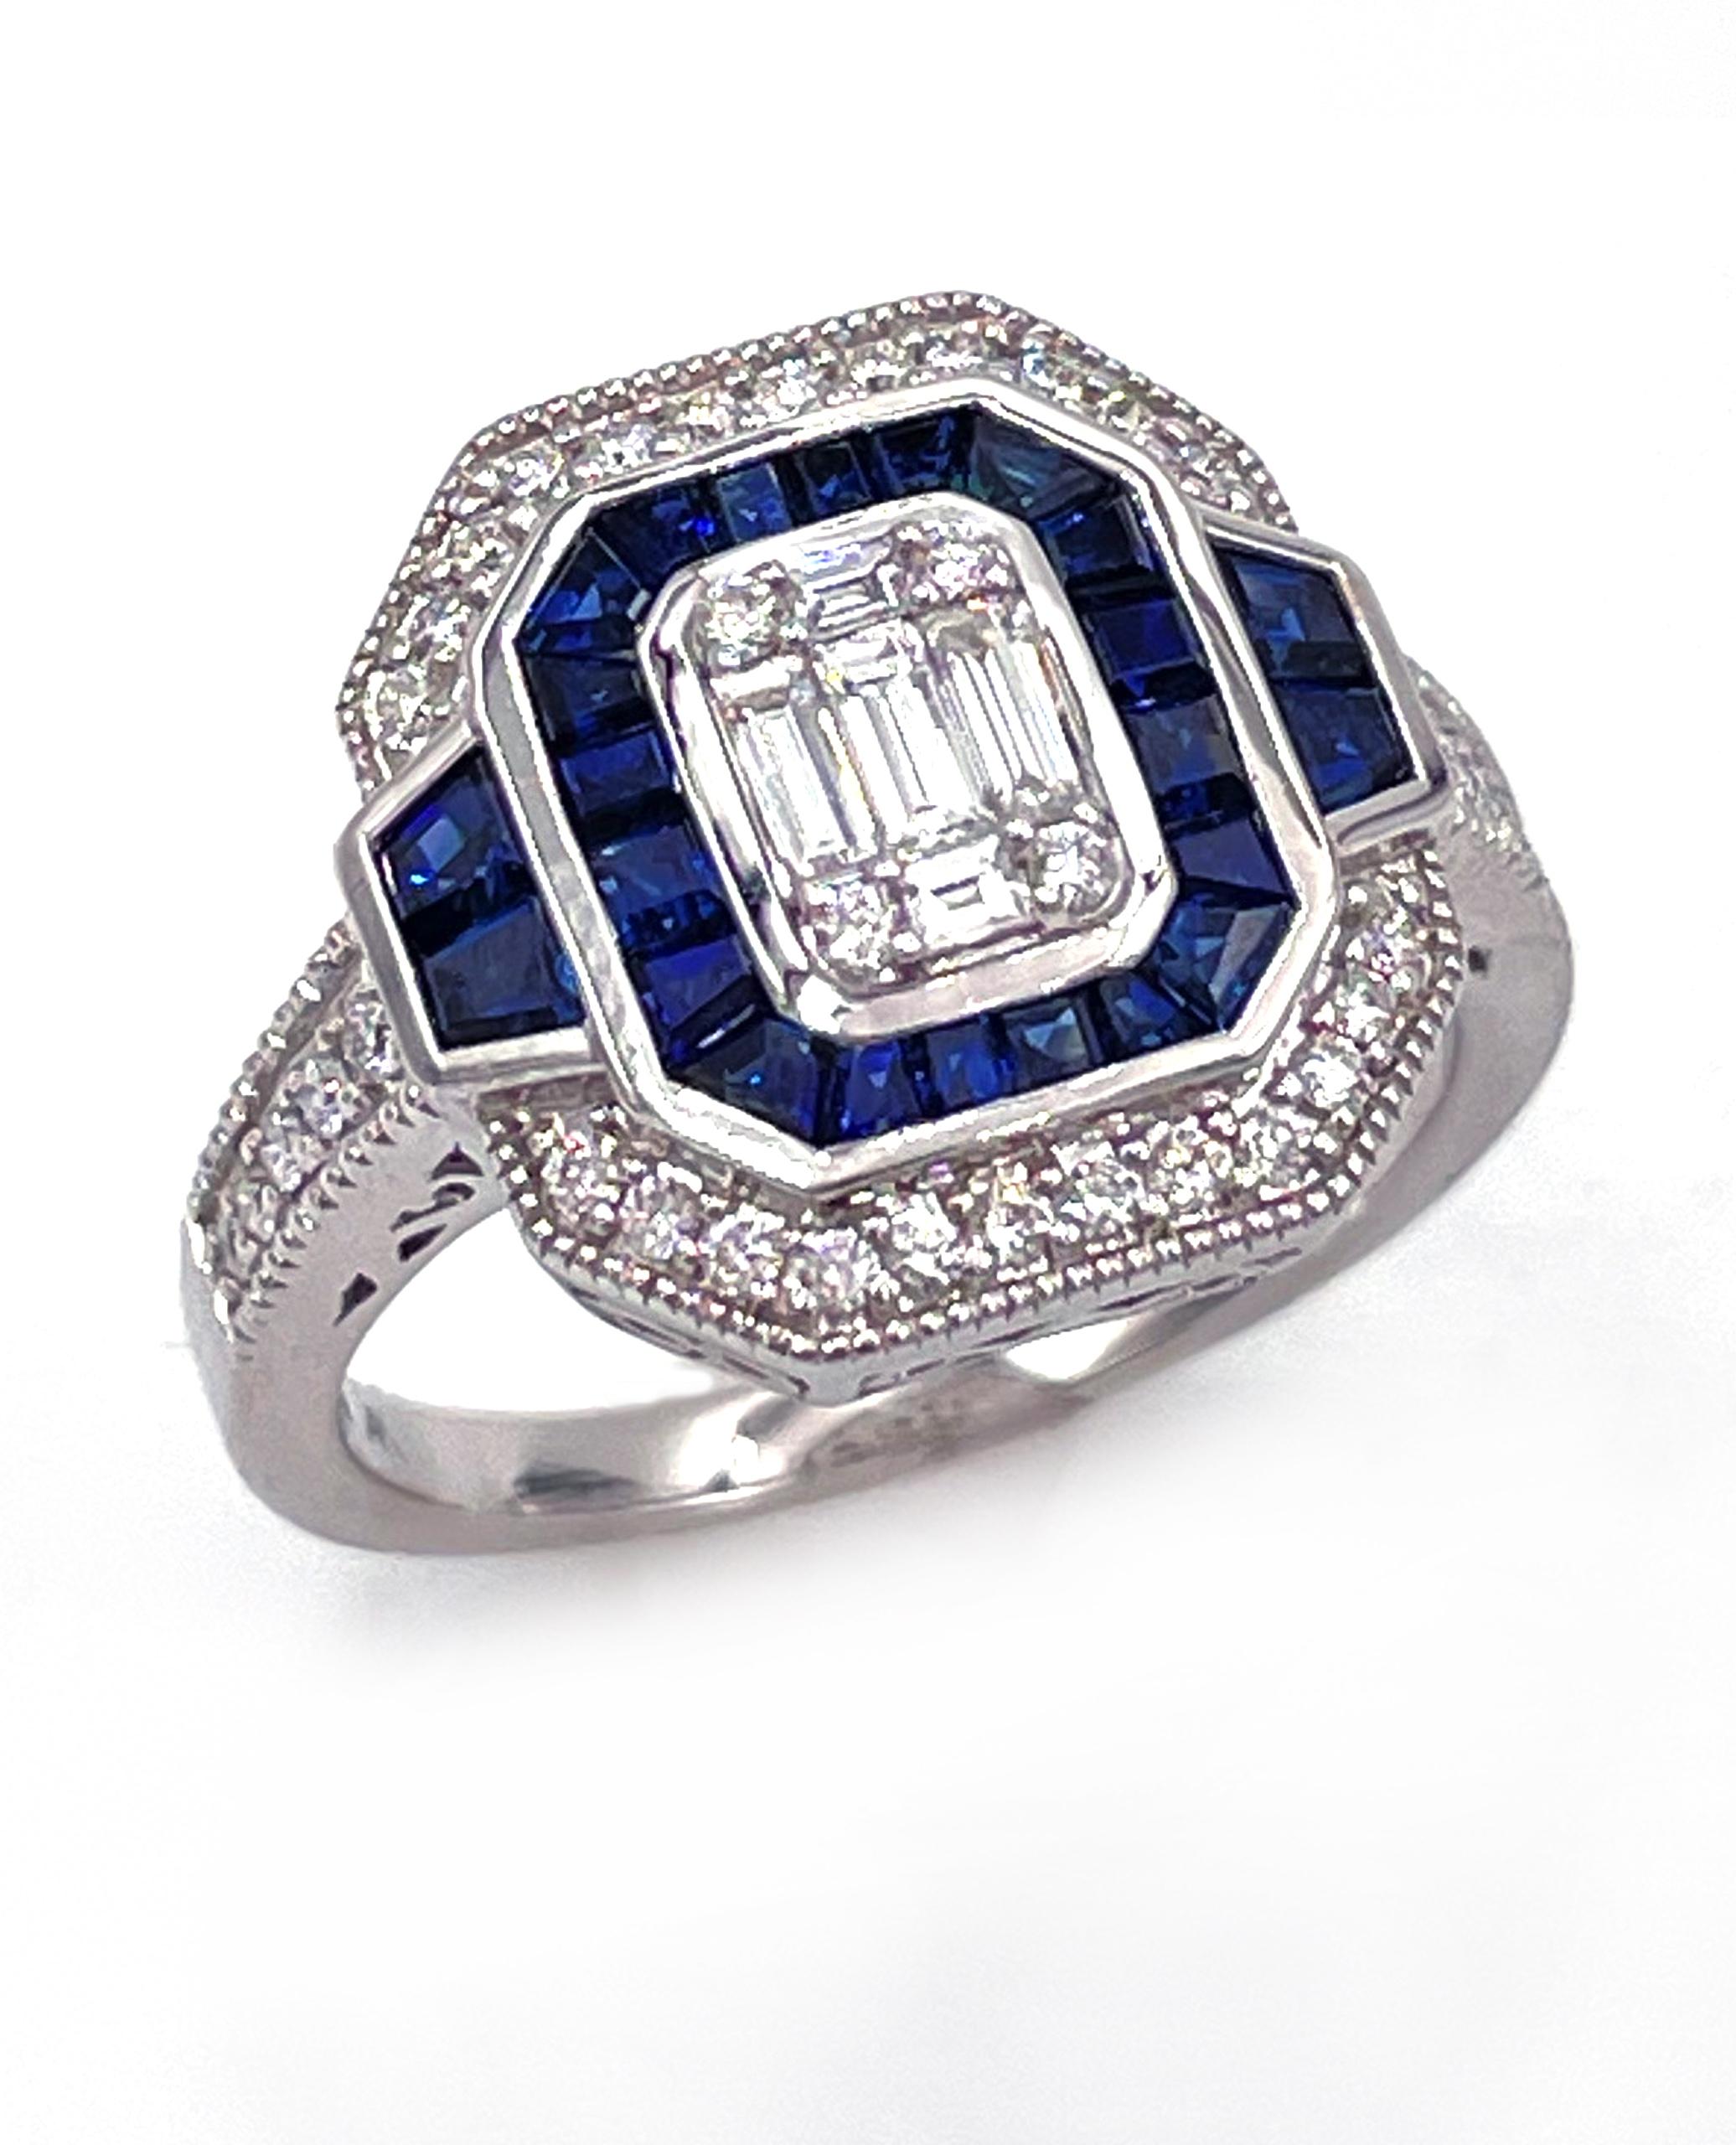 Allison Kaufman modern art deco style 14K white gold ring with 24 tapered baguette sapphires weighing 1.00 carats total. The ring is also furnished with 38 round brilliant-cut diamonds and 5 baguette diamonds weighing 0.40 carats total weight.

-